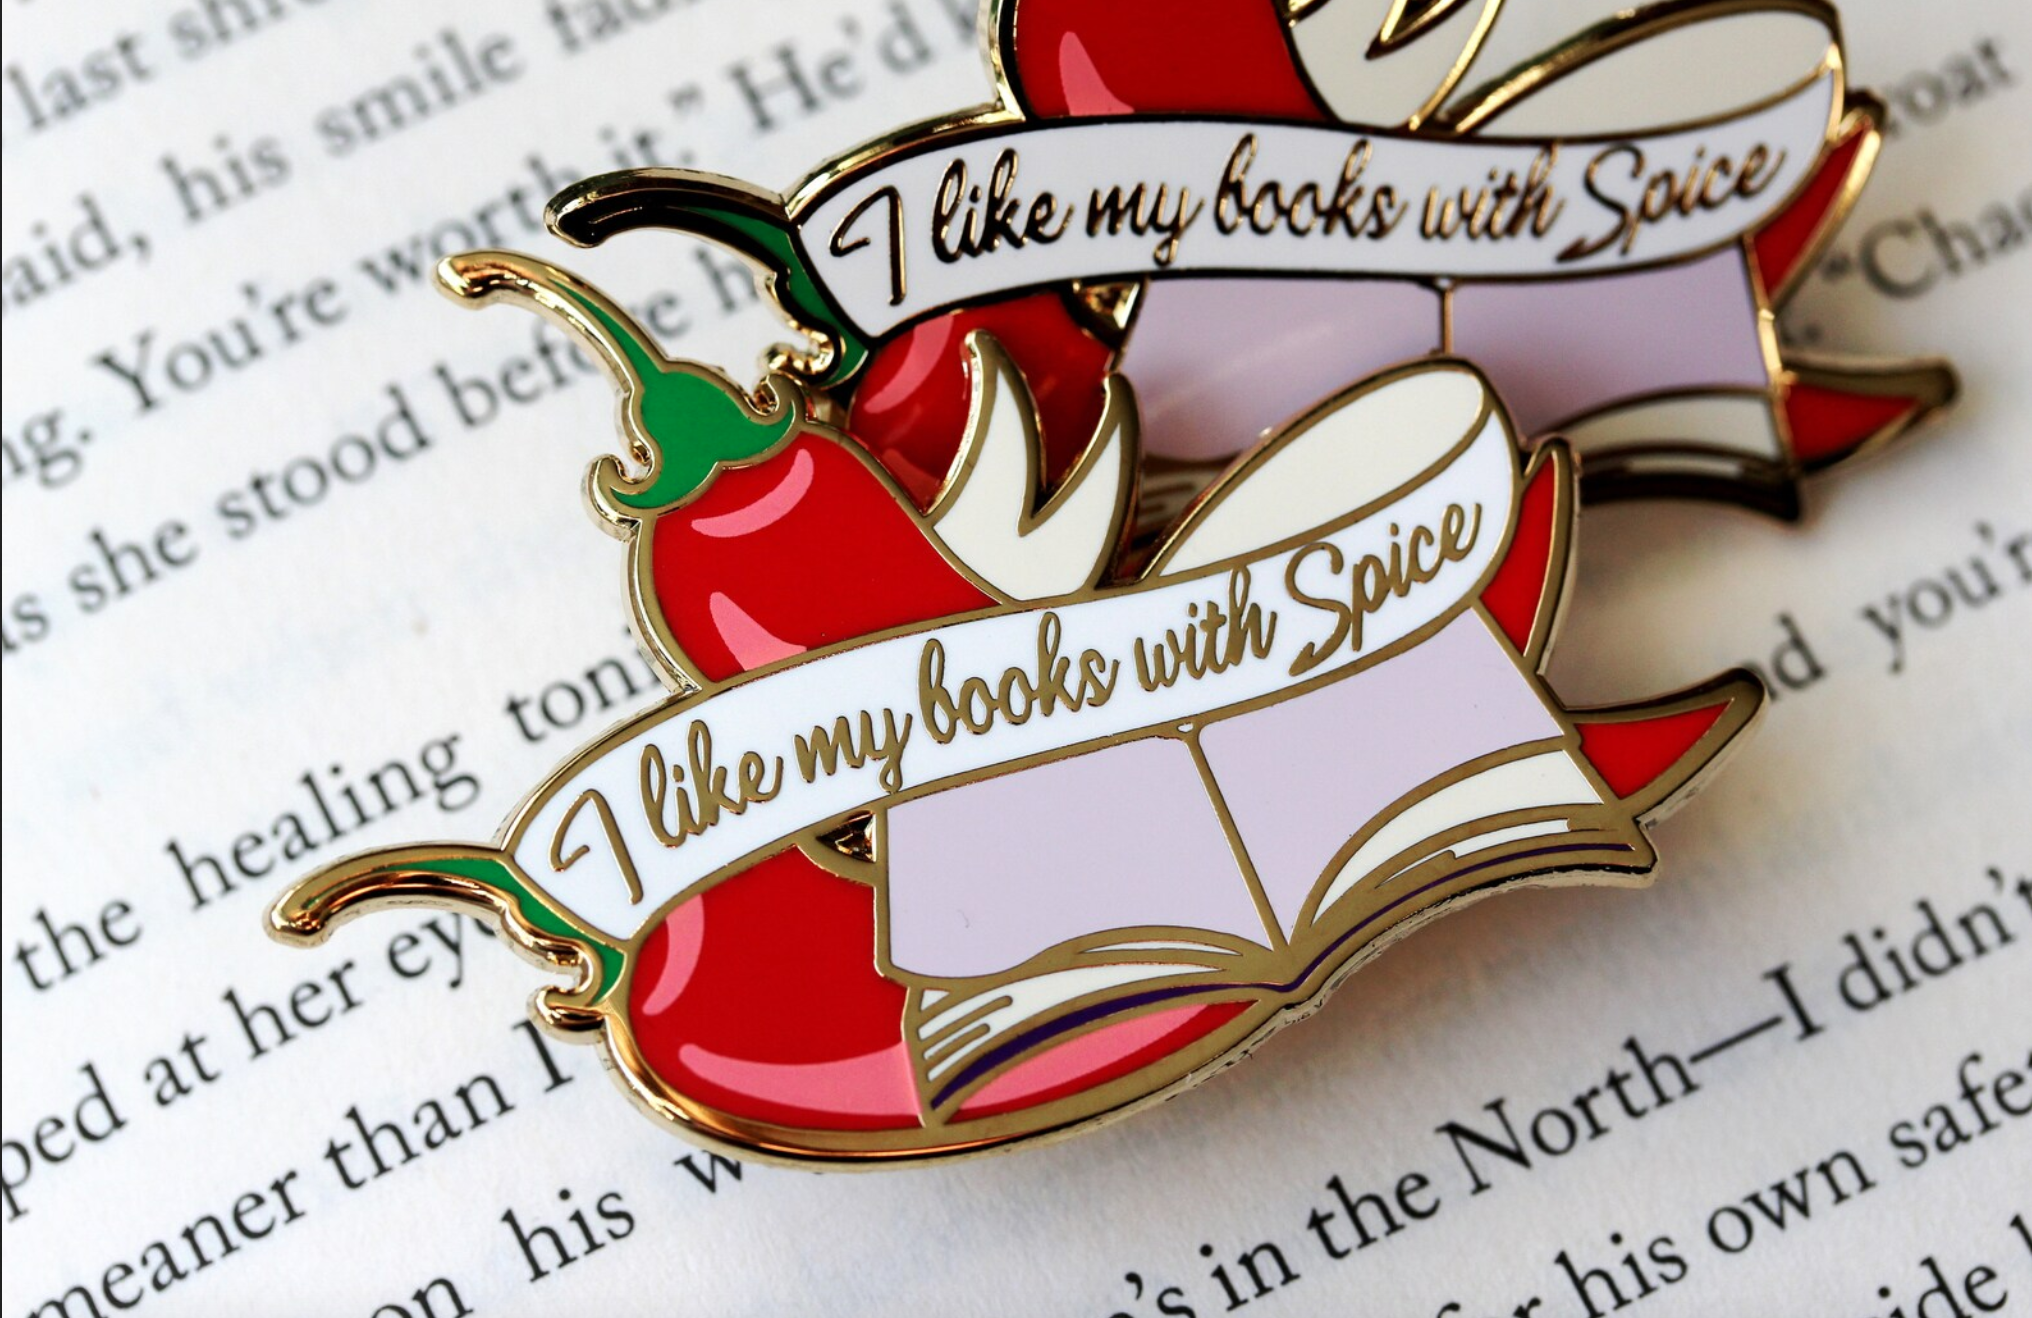 Enamel pin of an open book with chili peppers that says "I like my book with spice"